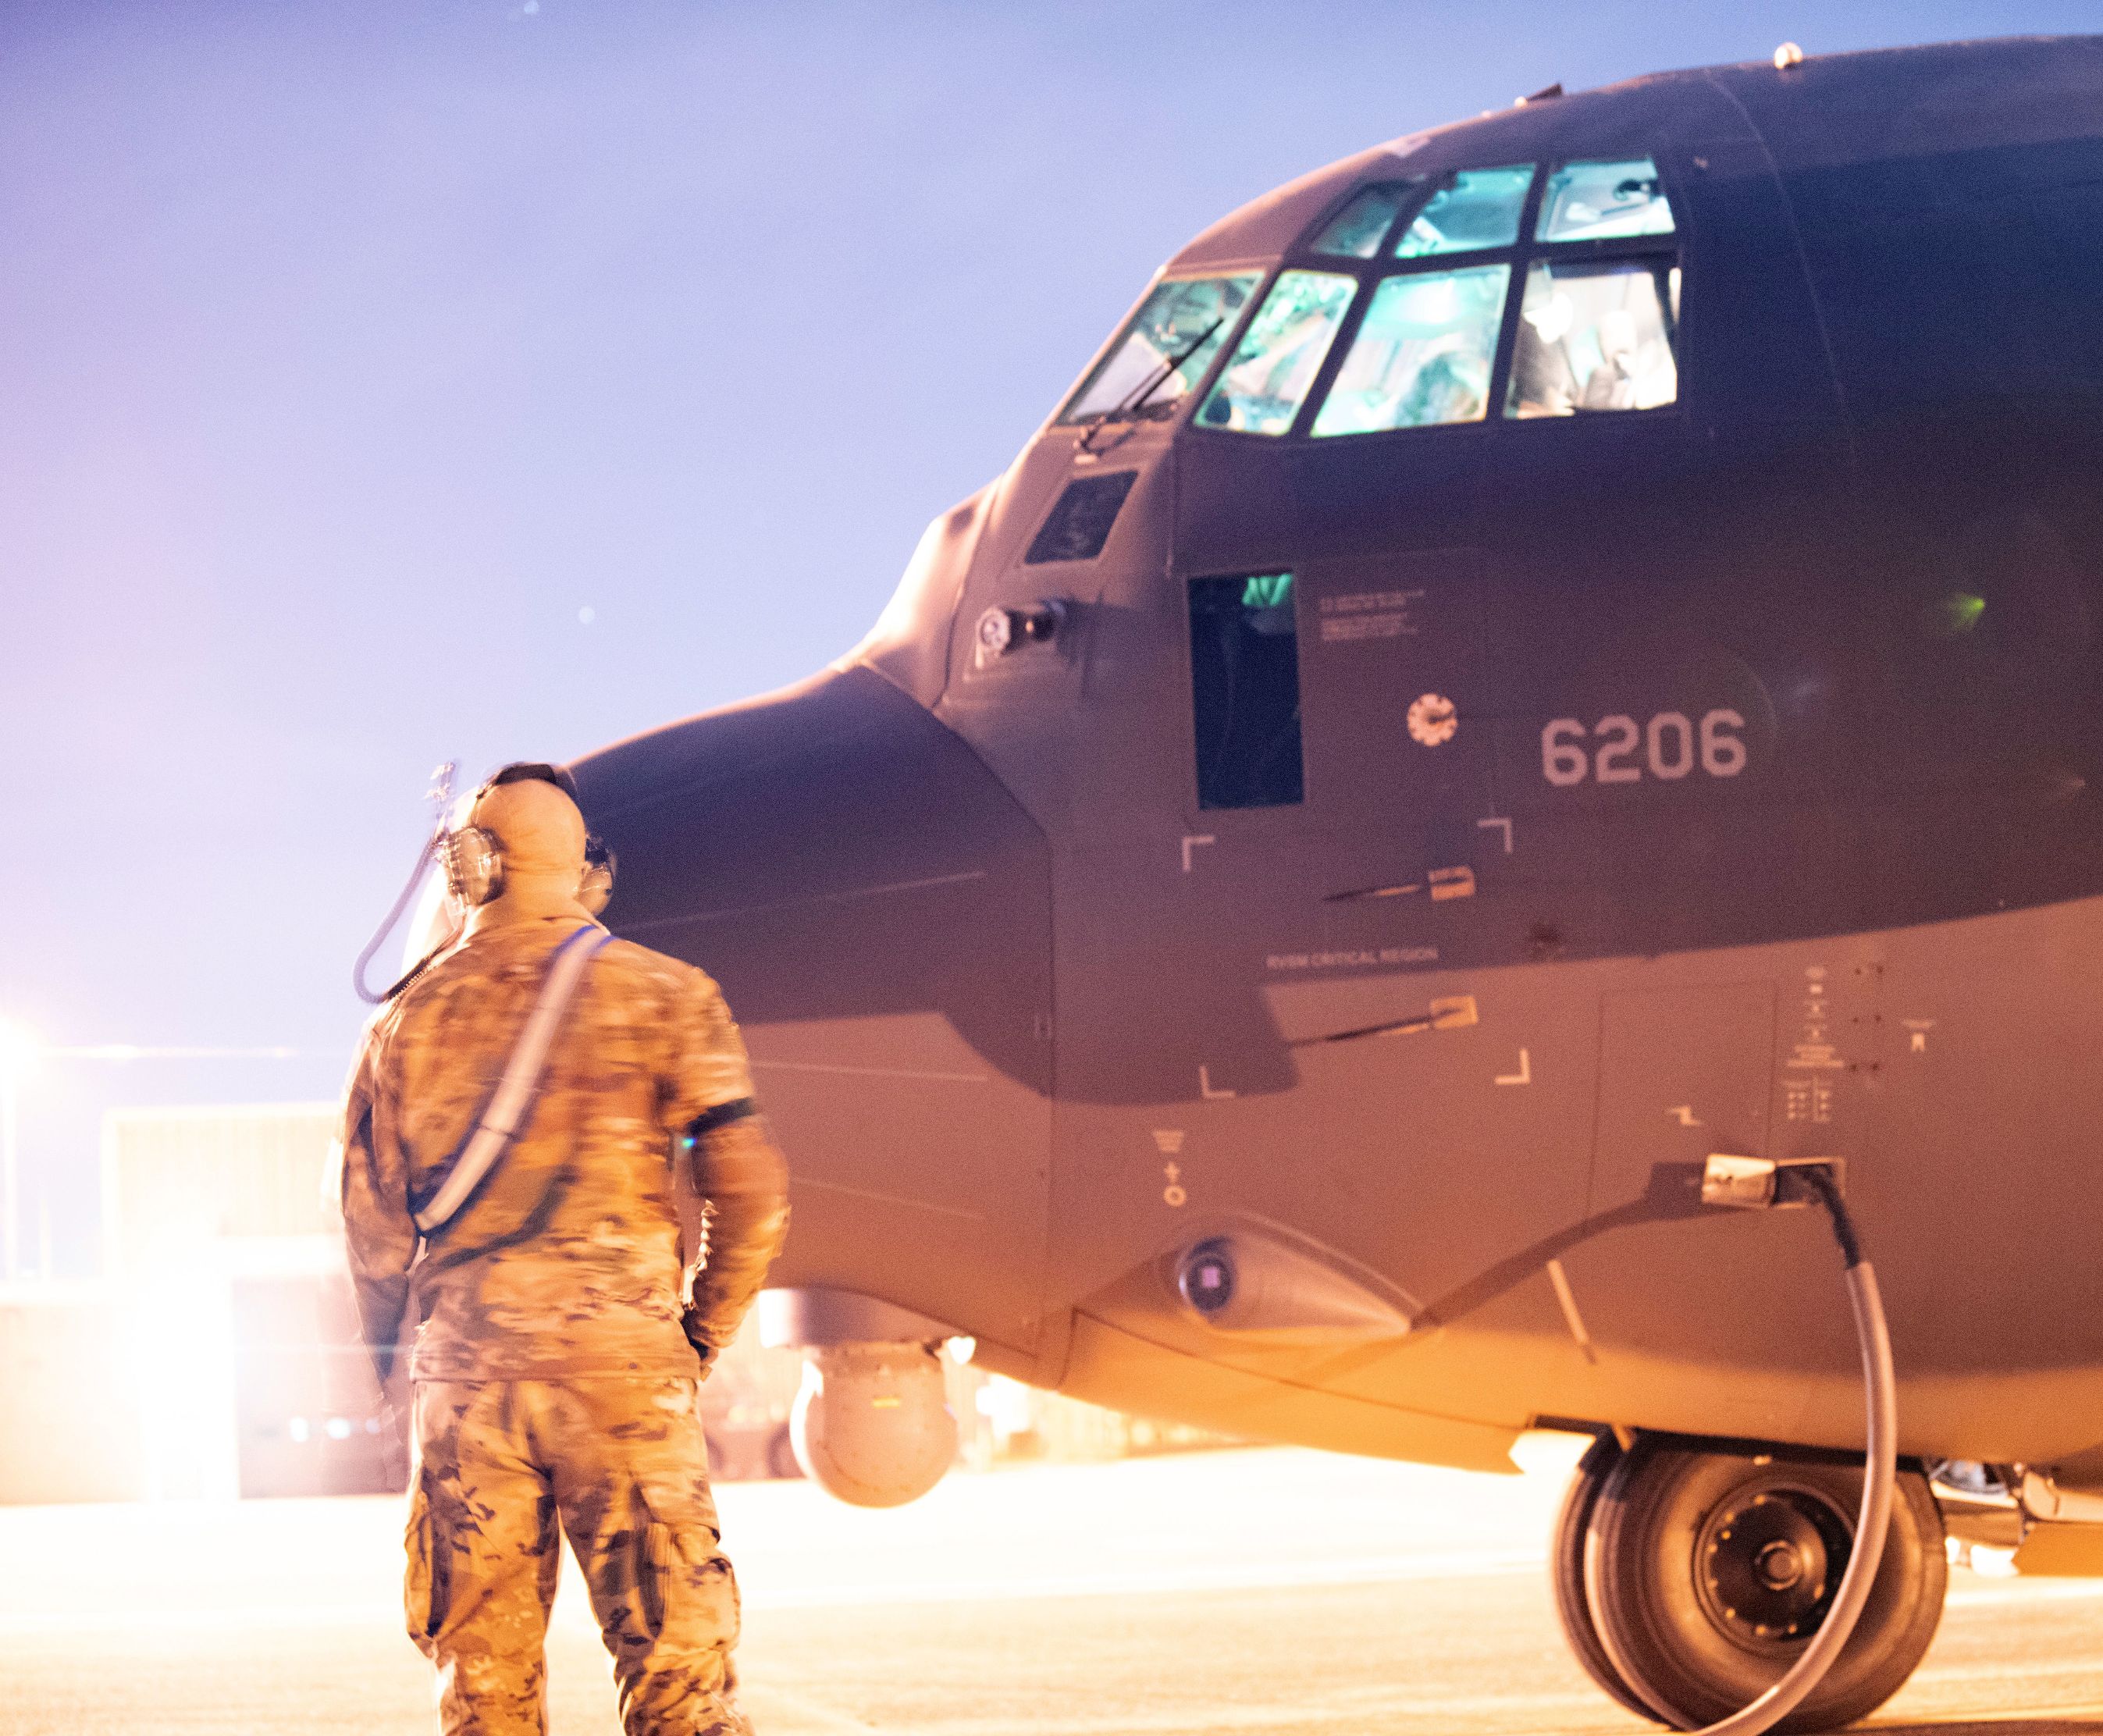 An MC-130J Commando II arrives at the 193rd Special Operations Wing Feb. 2, 2023 at Middletown, Pennsylvania. The aircraft is the first to arrive to the 193rd SOW, marking a symbolic beginning to its new primary mission as the first, and currently only Air National Guard unit to operate the Commando II. (U.S. Air National Guard photo by Master Sgt. Alexander Farver)